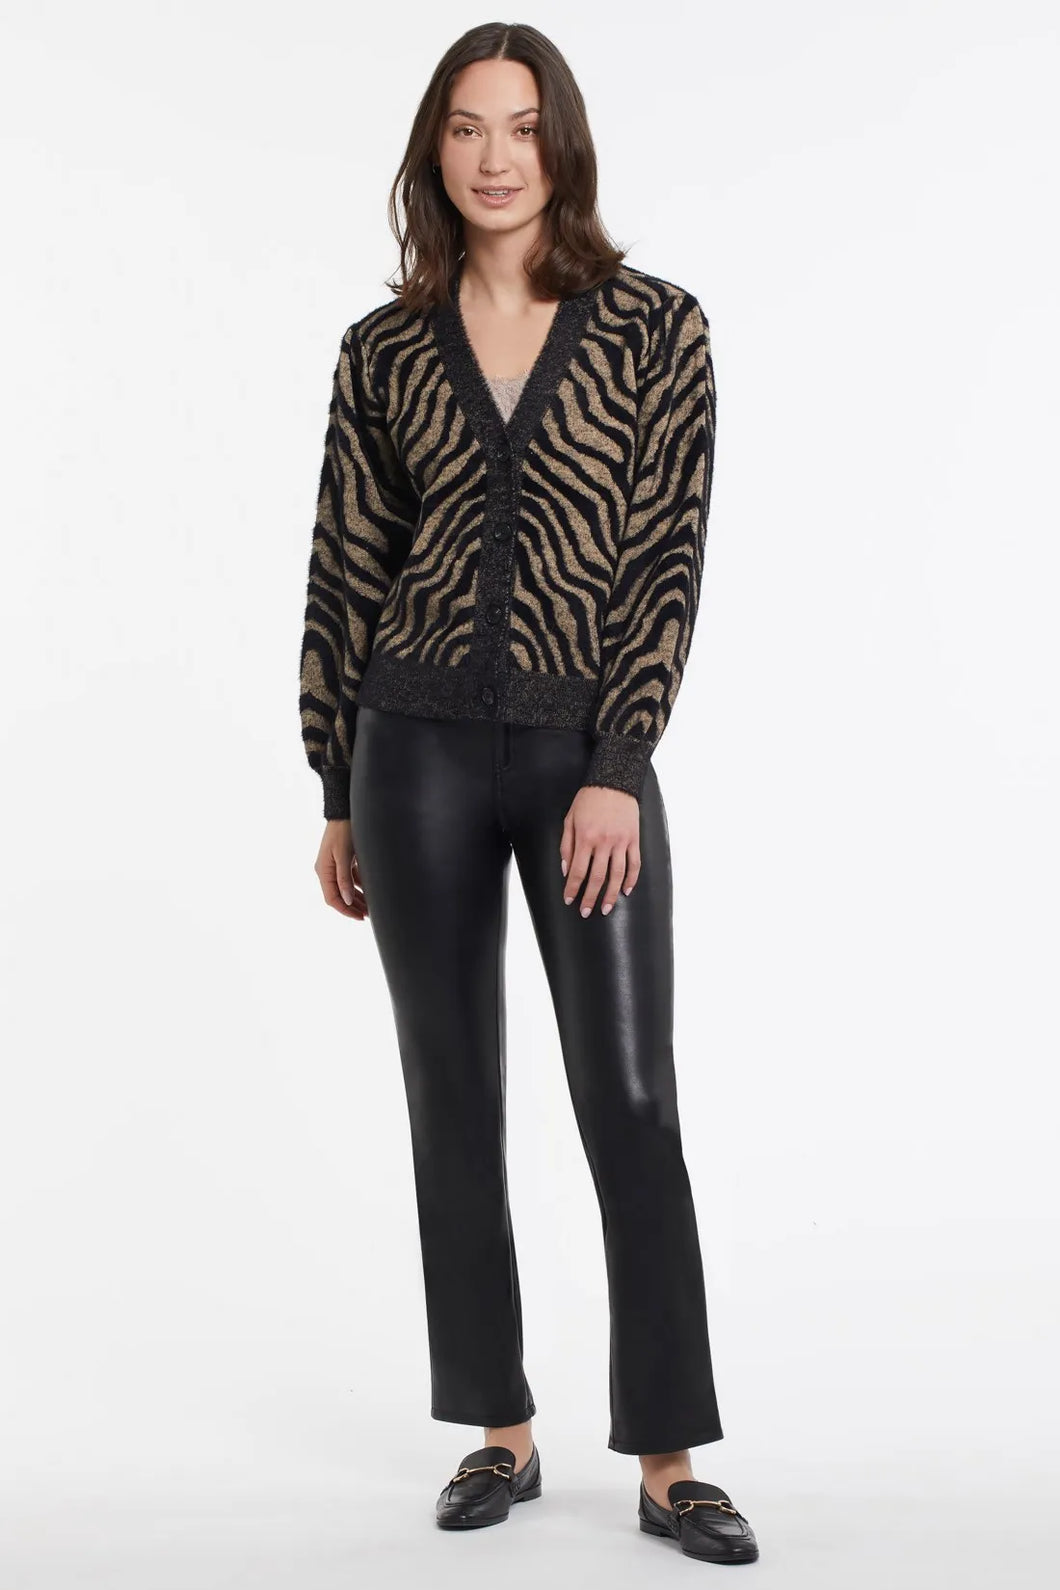 Animal print is here to stay. We are loving the dynamic zebra print in a black and tan combination. The ultra-soft feather knit on this gorgeous cardigan will provide you all day comfort and endless style!  Color- Black and tan. Button-front V-neck. Relaxed fit. Contrast placket, hem, and cuffs. Feather sweater yarn.